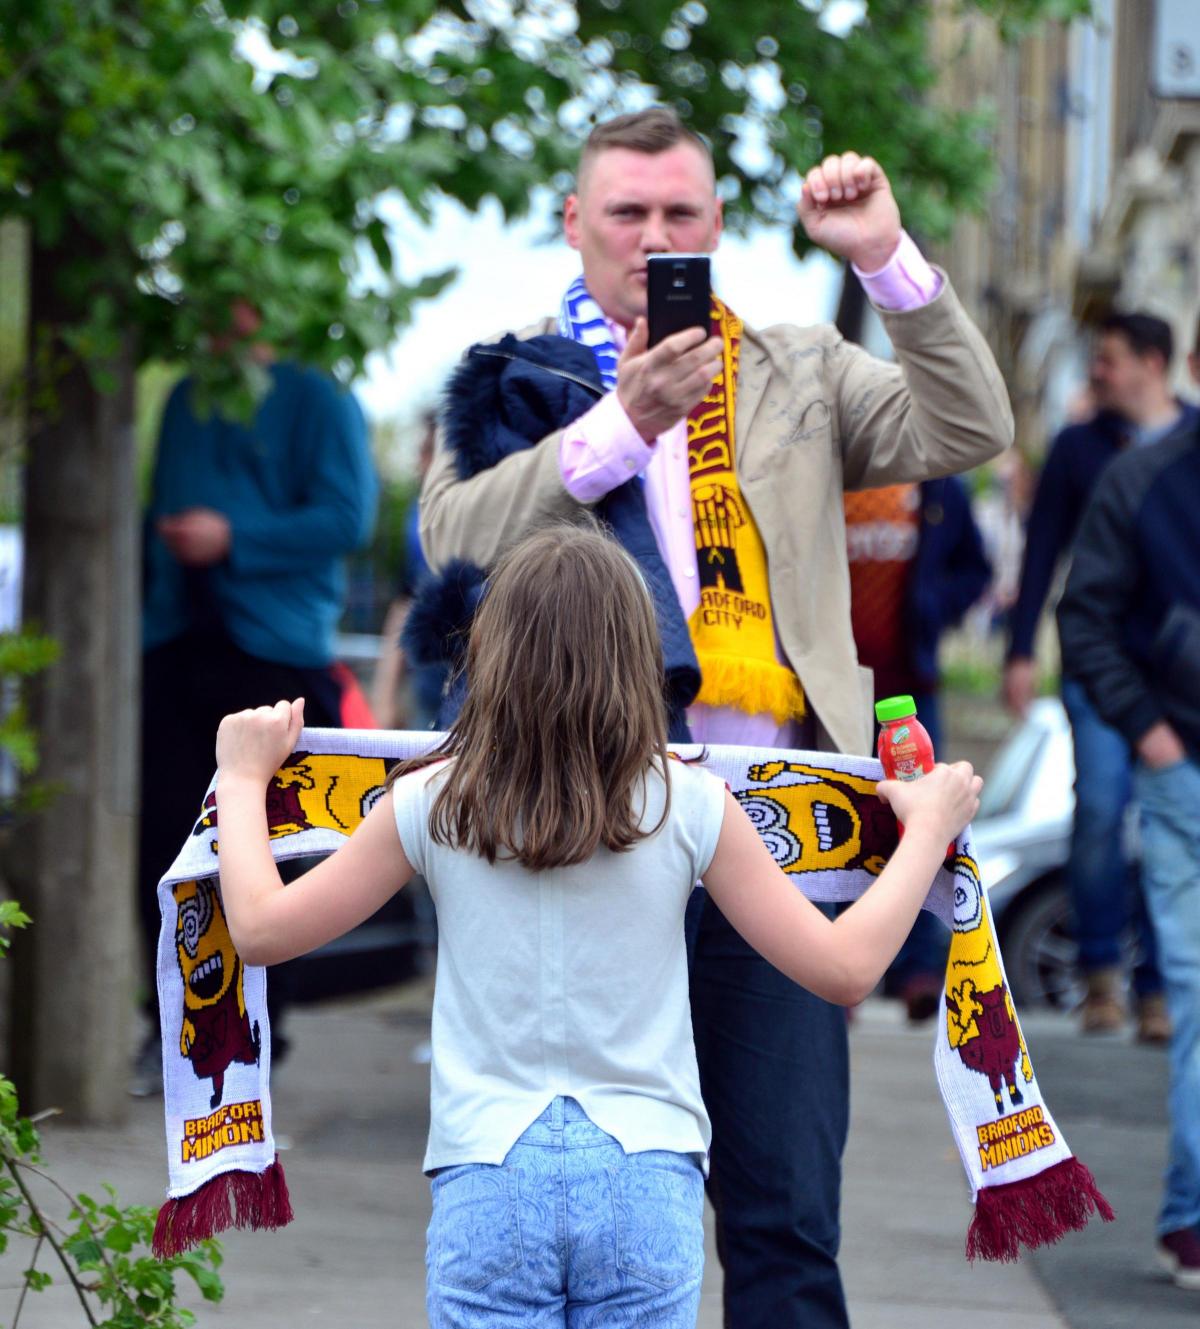 Pre-match scenes around Valley Parade ahead of today's big play-off match